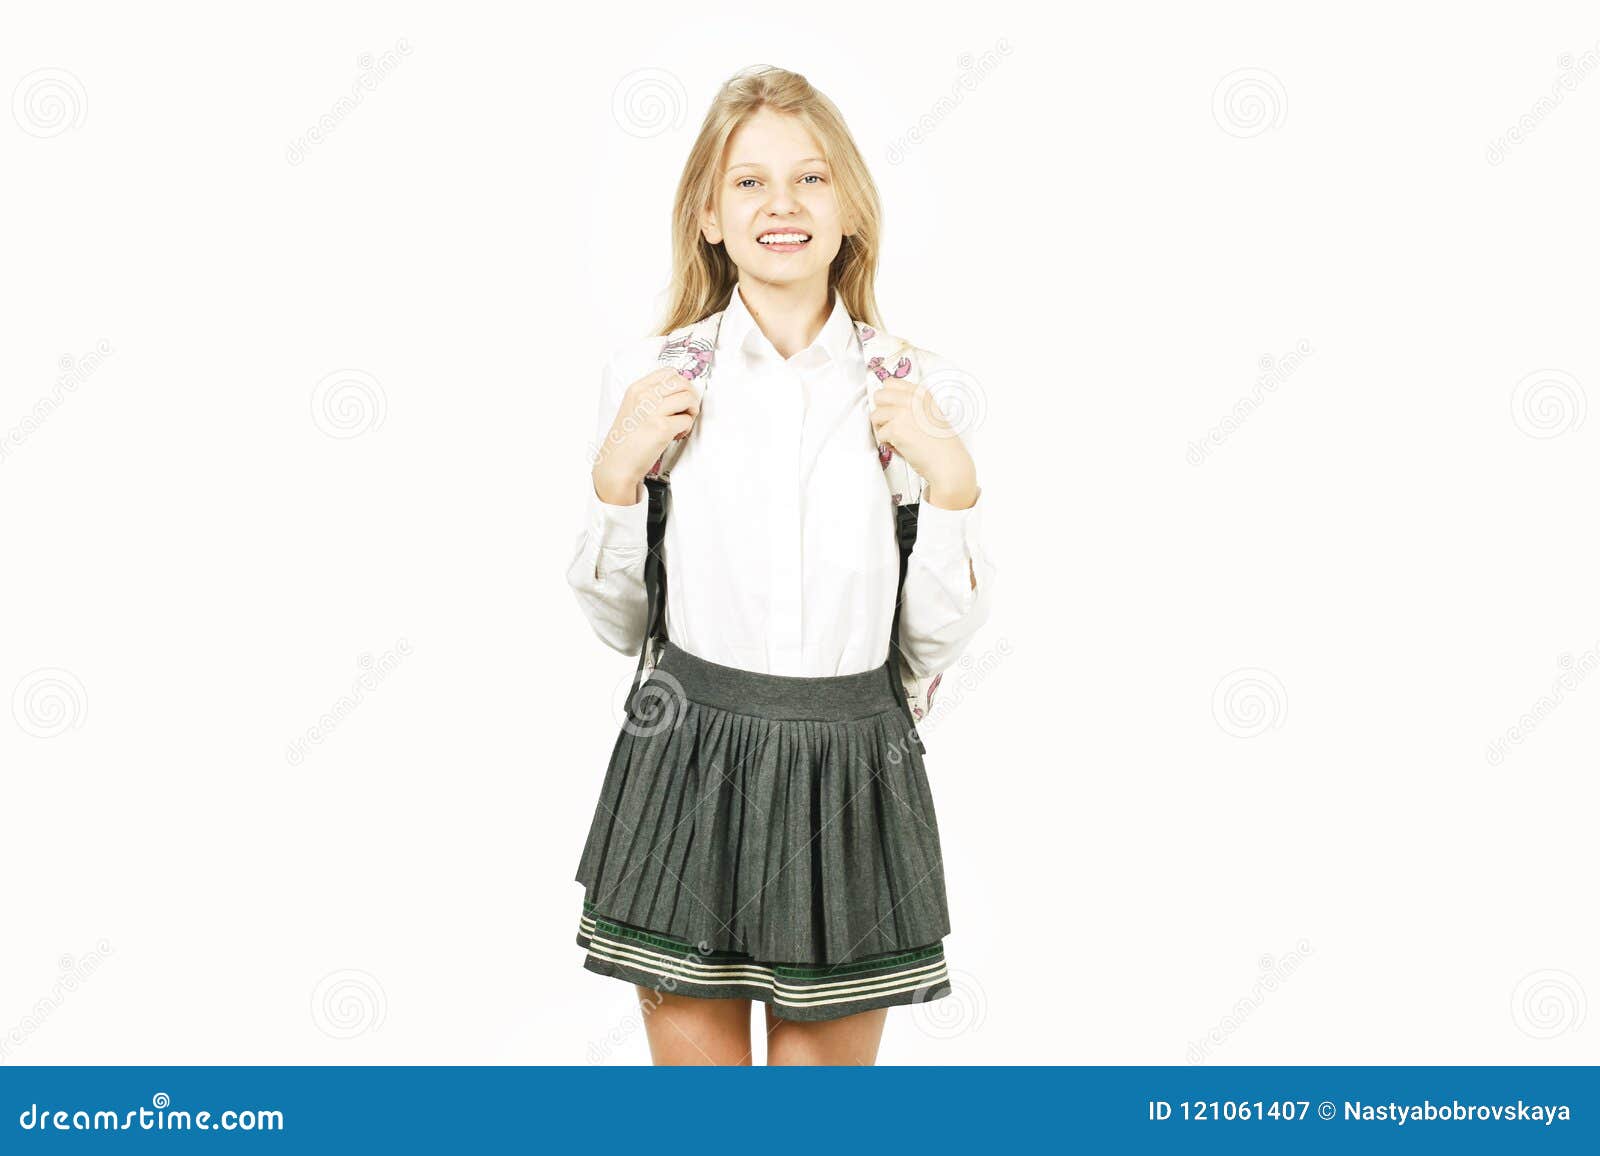 The Girl In A White Shirt And Braces Royalty Free Stock